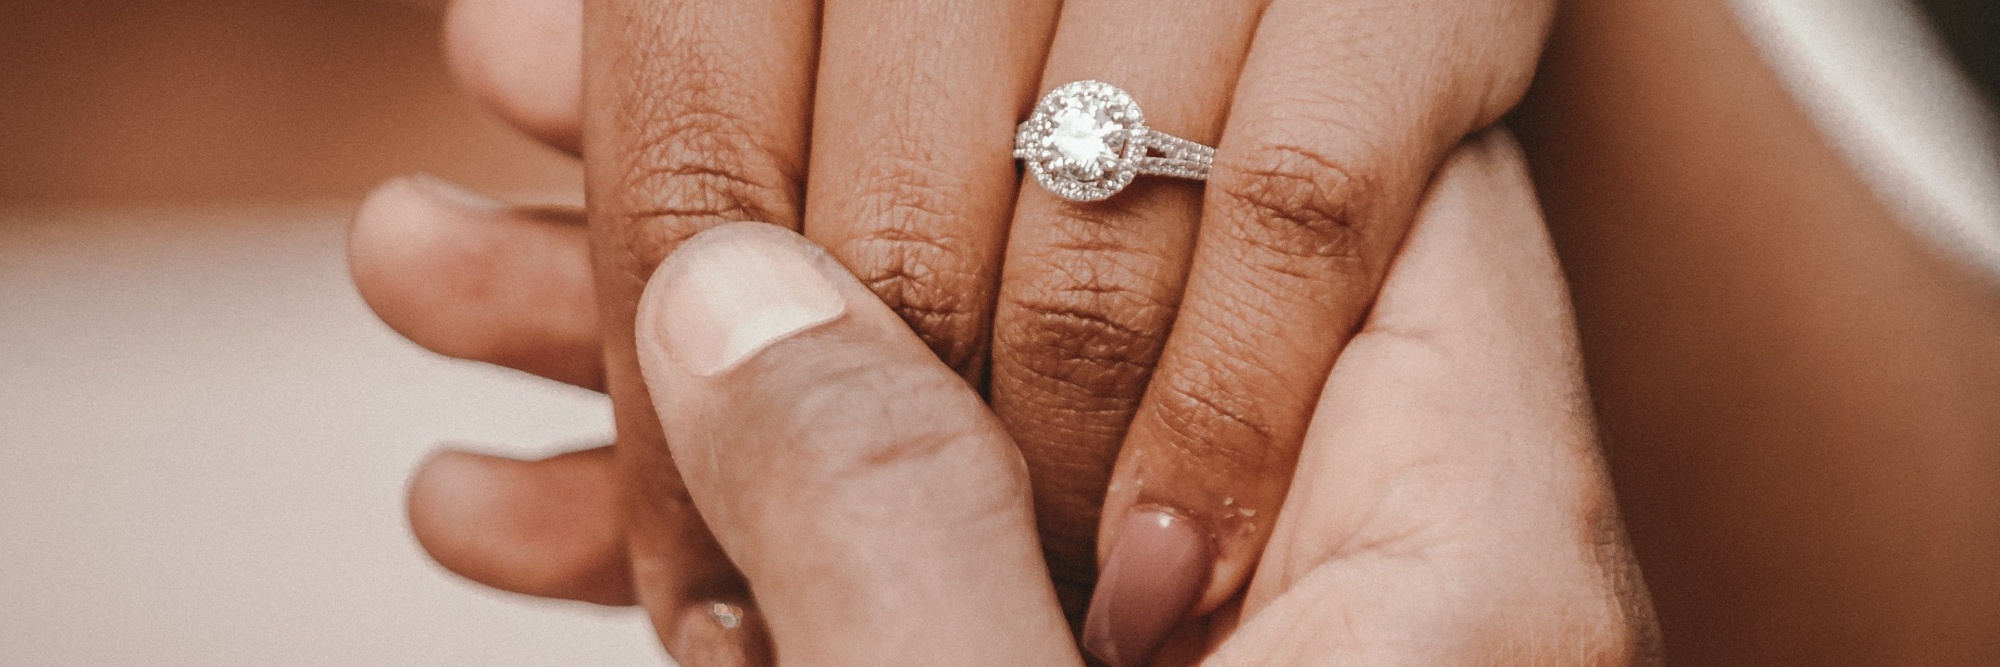 5 Carat Diamond Engagement Rings - Shop and Advice